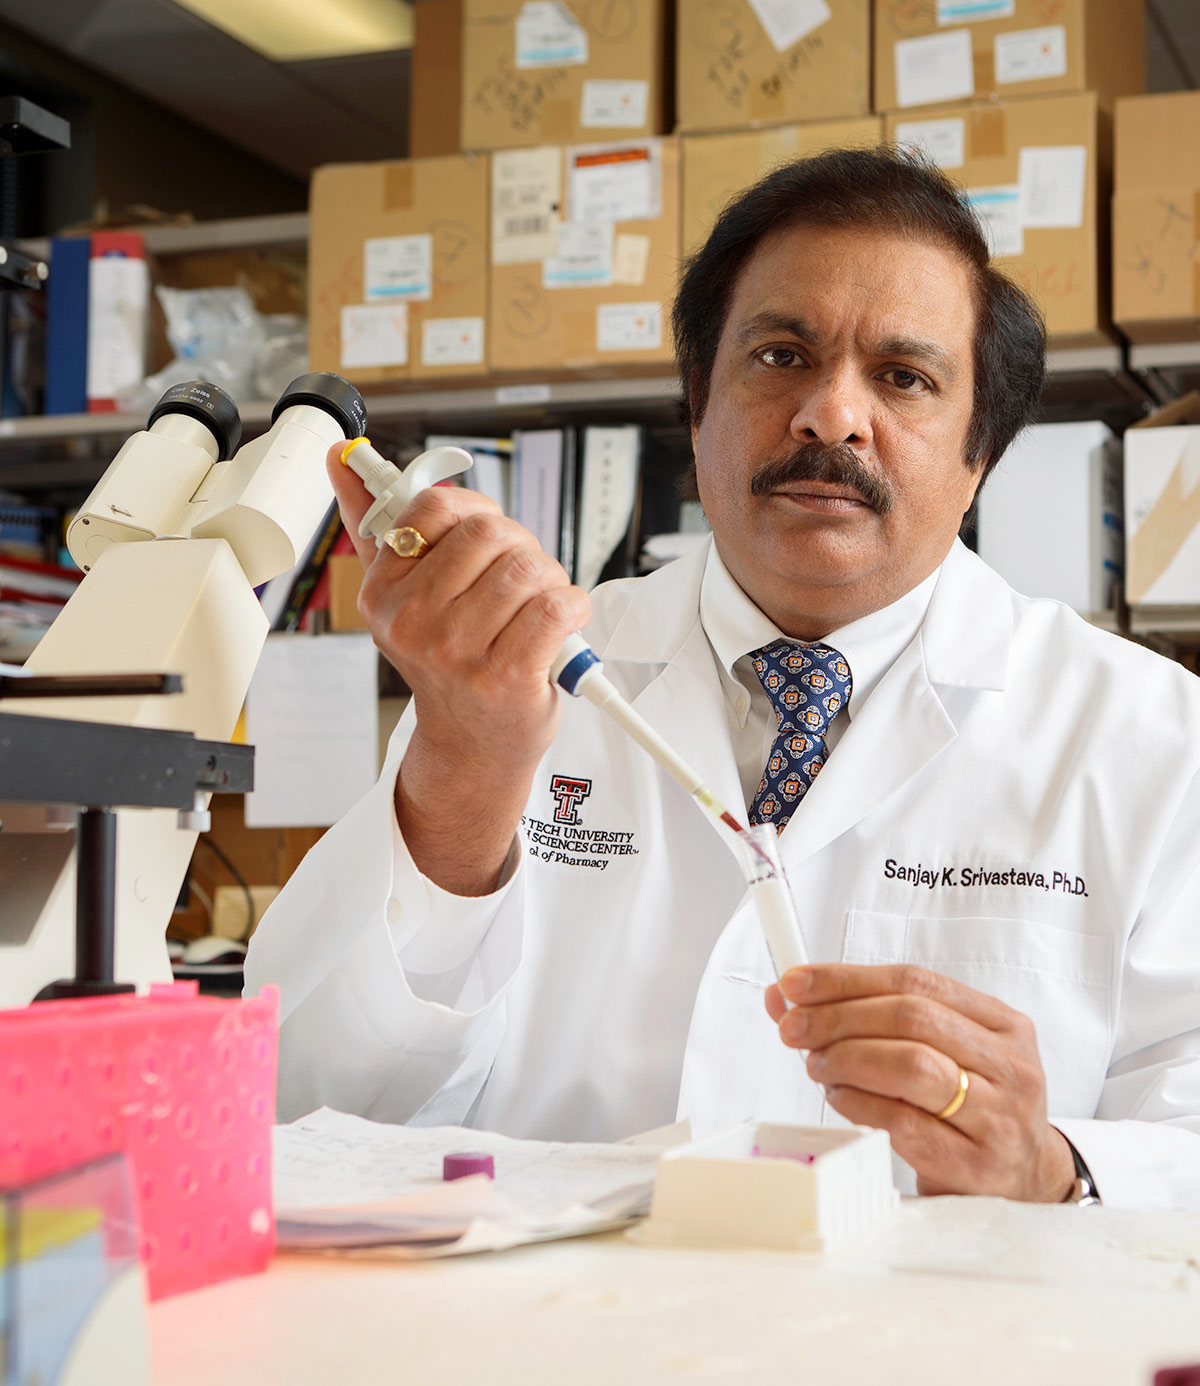 A portrait photograph of Sanjay Srivastava, PhD wearing a lab coat while using a pipette at a desk